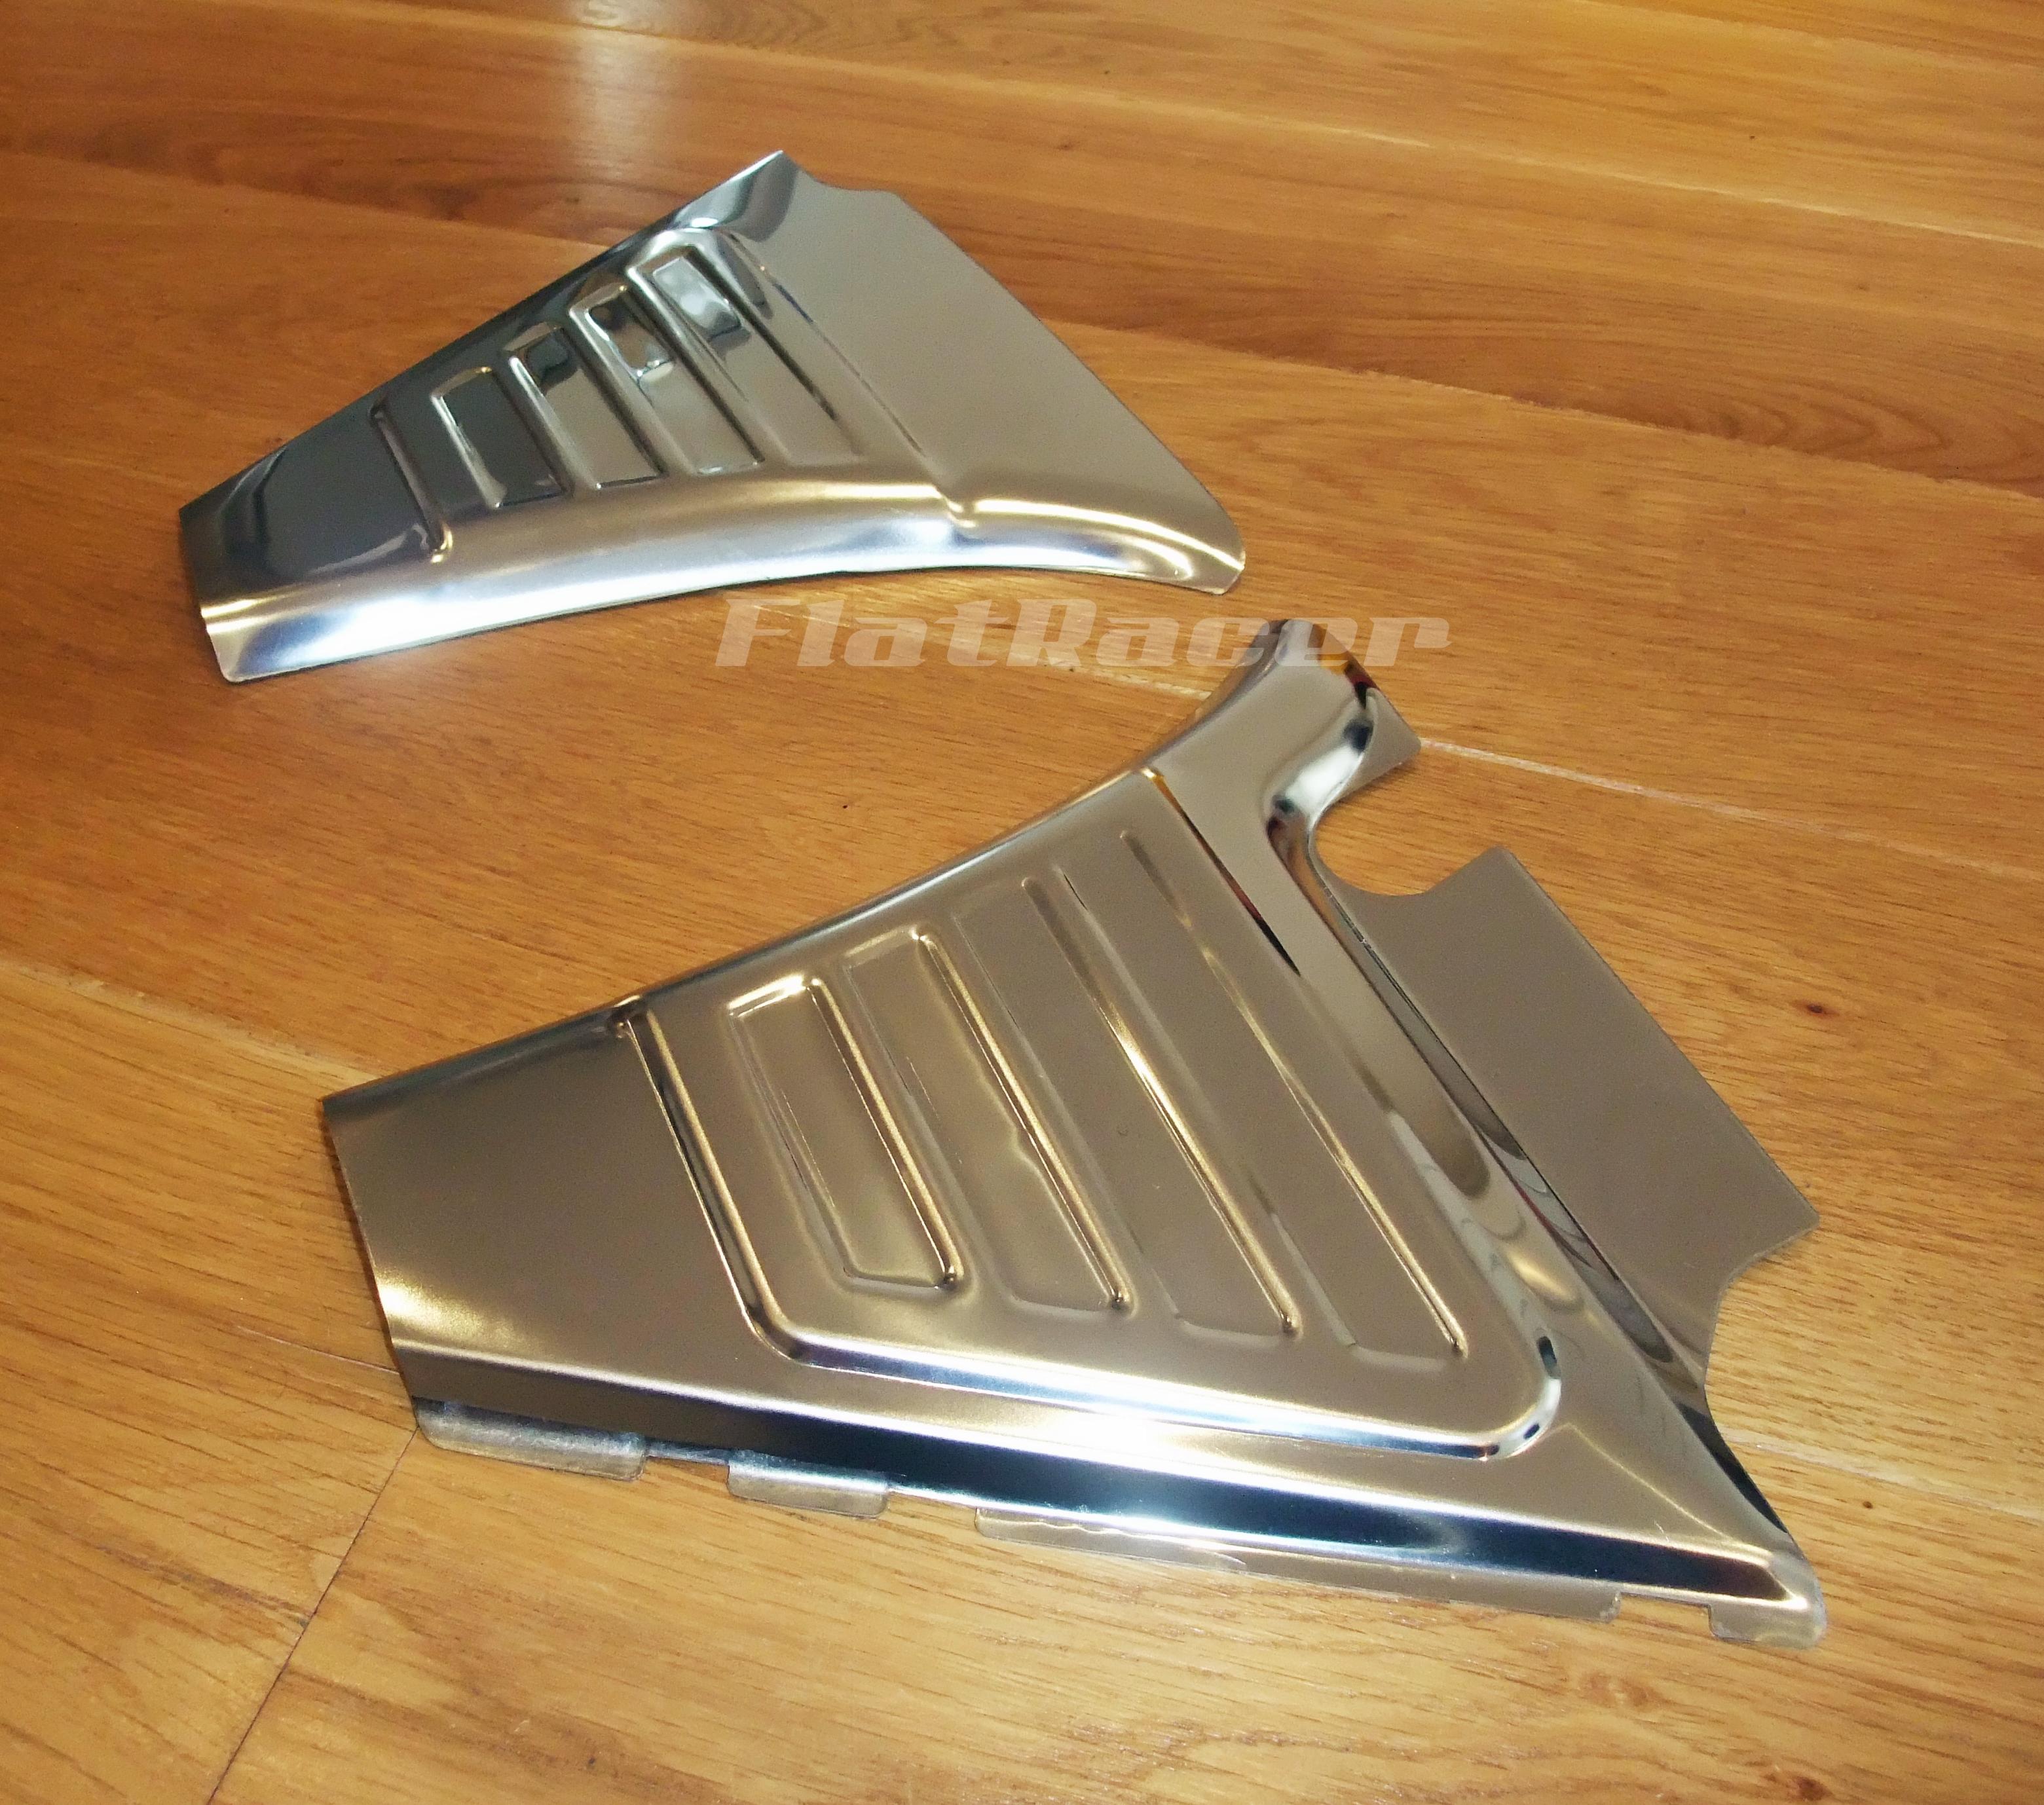 FlatRacer BMW /5 replica stainless steel battery covers / side panels (pair)